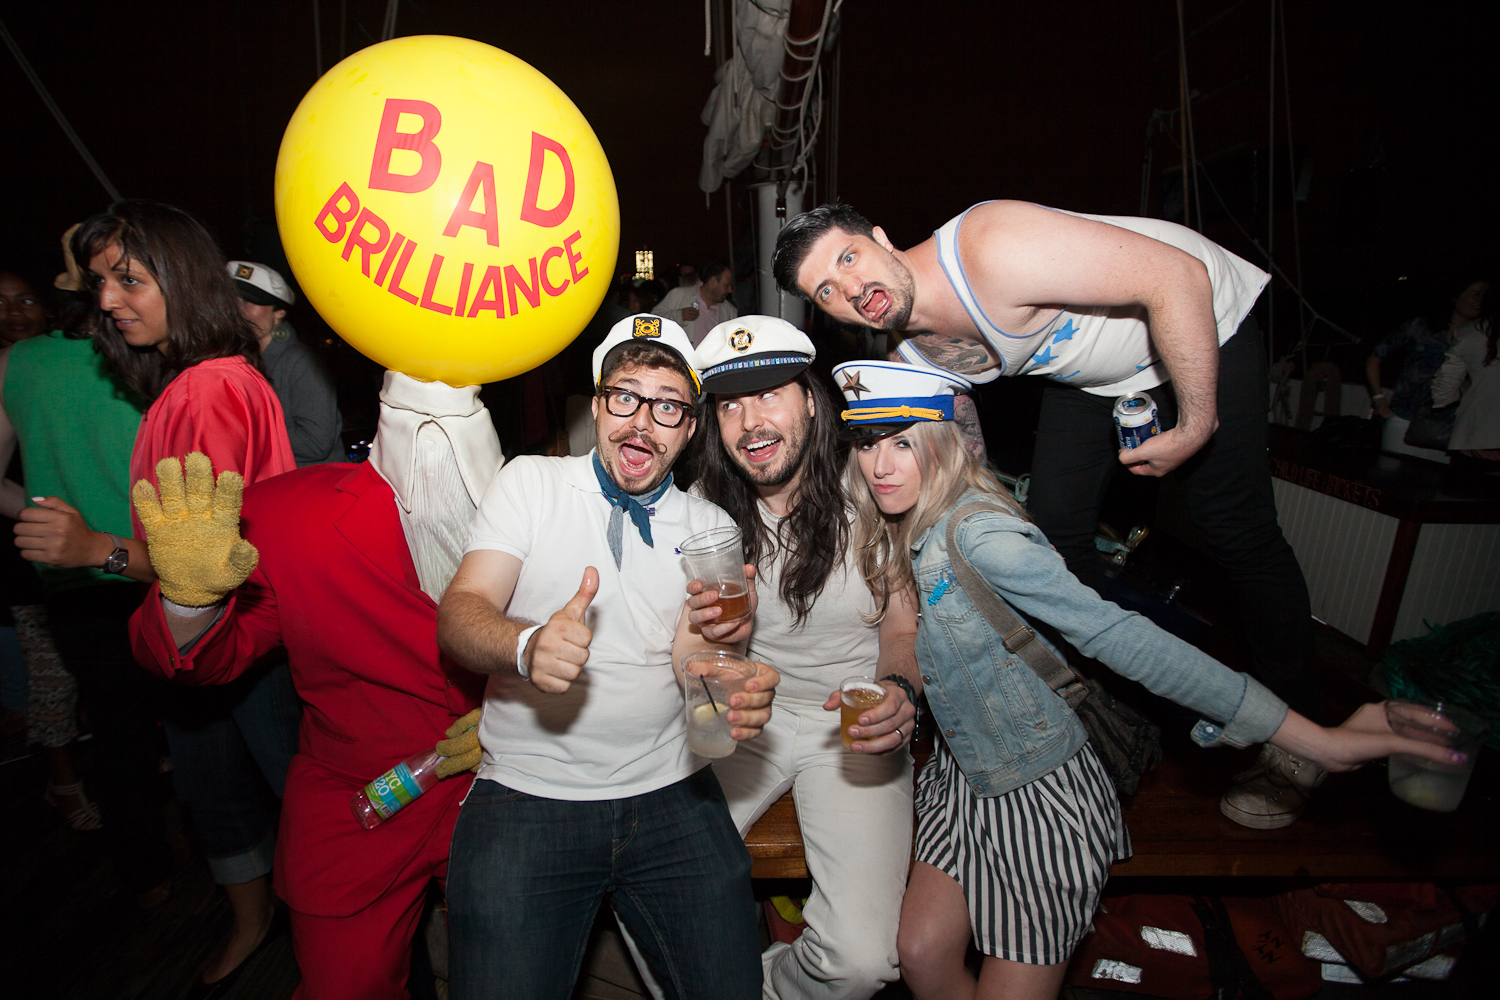 Bad Brilliance, Nicky Digital, Andrew W.K., Lacey Youngblood and Richie Beretta